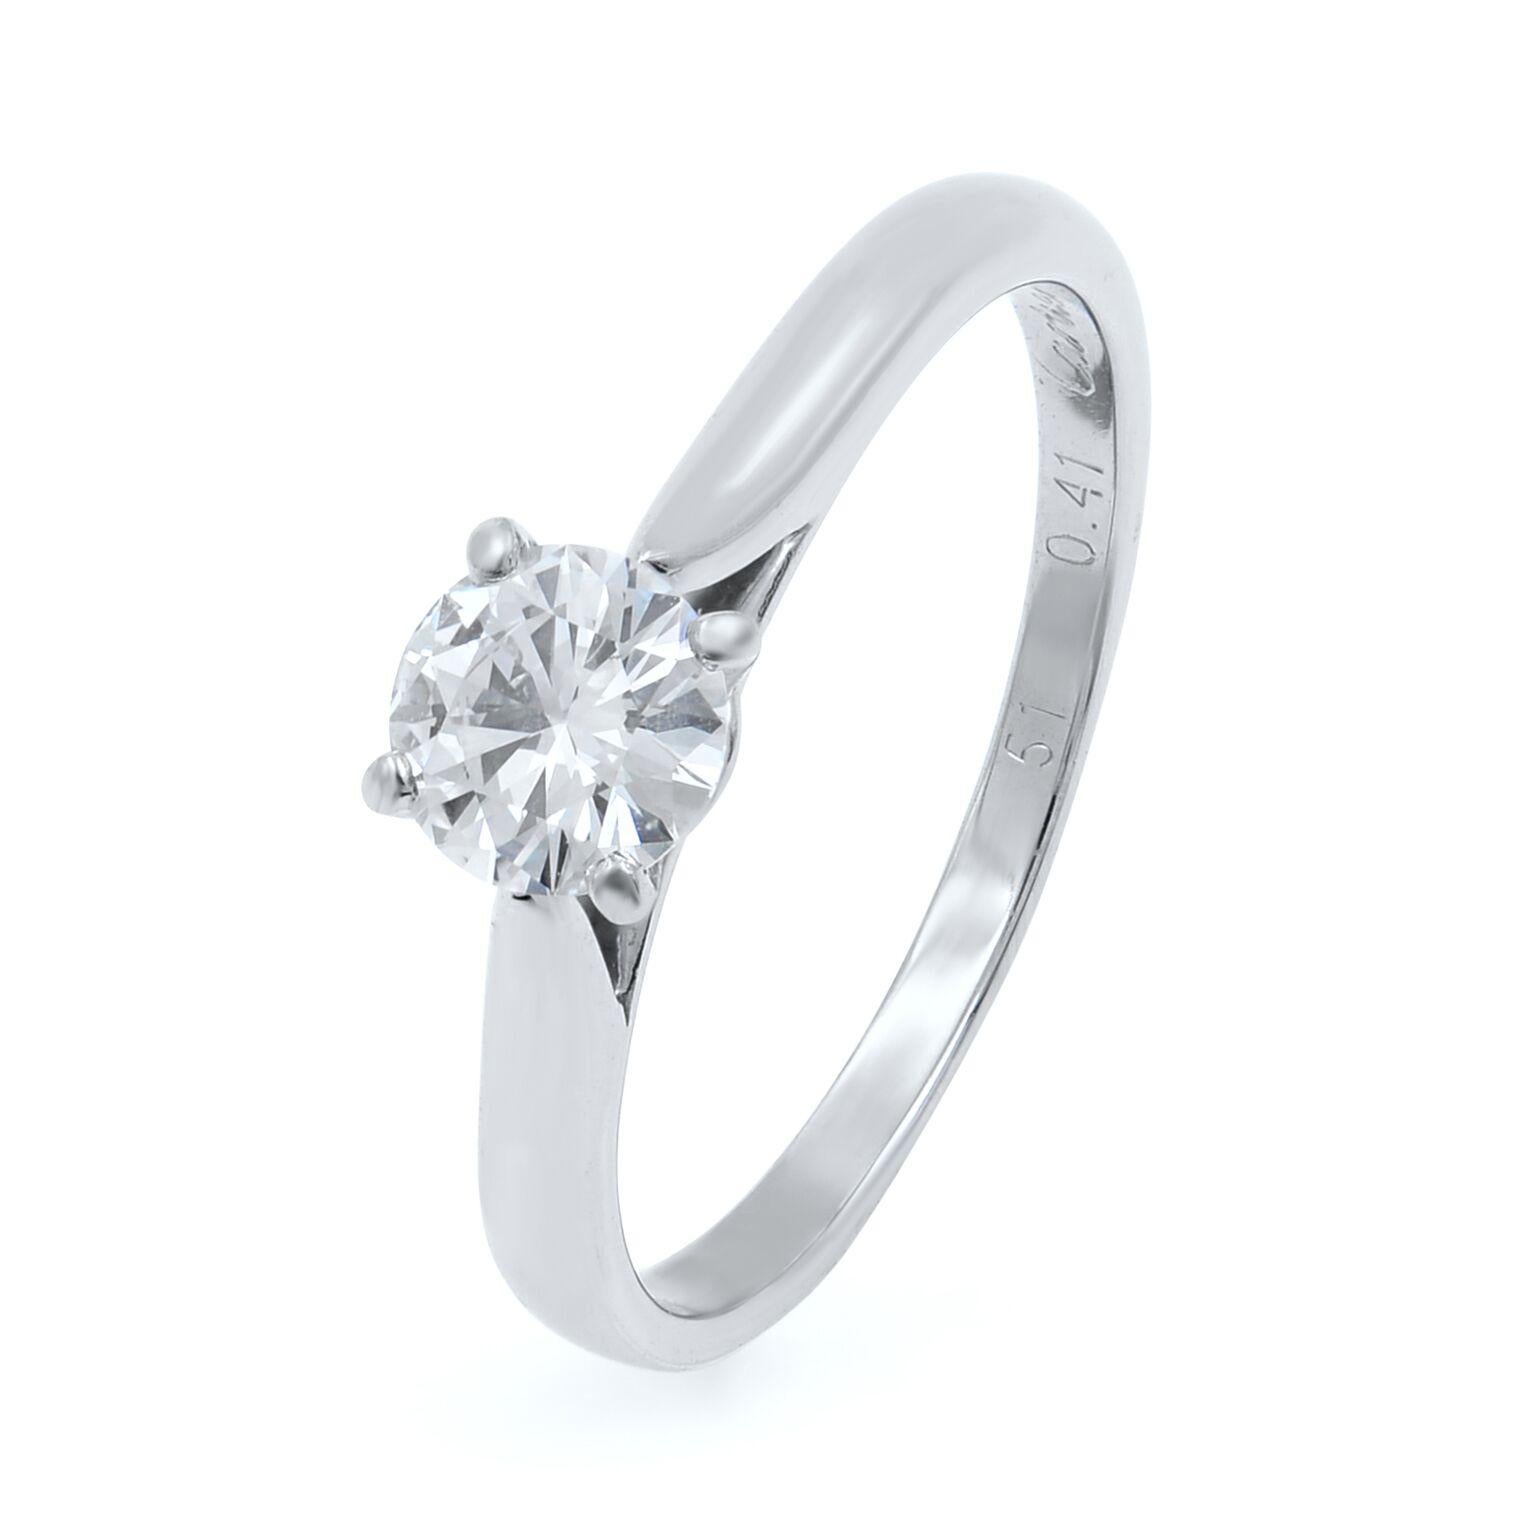 Cartier Classic Solitaire Engagement Ring.
1895 collection from Cartier.
Solitaire diamond weighs 0.41cts H VS1. 
Ring size: 51 (US 5.5-5.75).
Ring is in excellent condition. Has minimal signs of wear ( will be polished before shipping).
Comes with